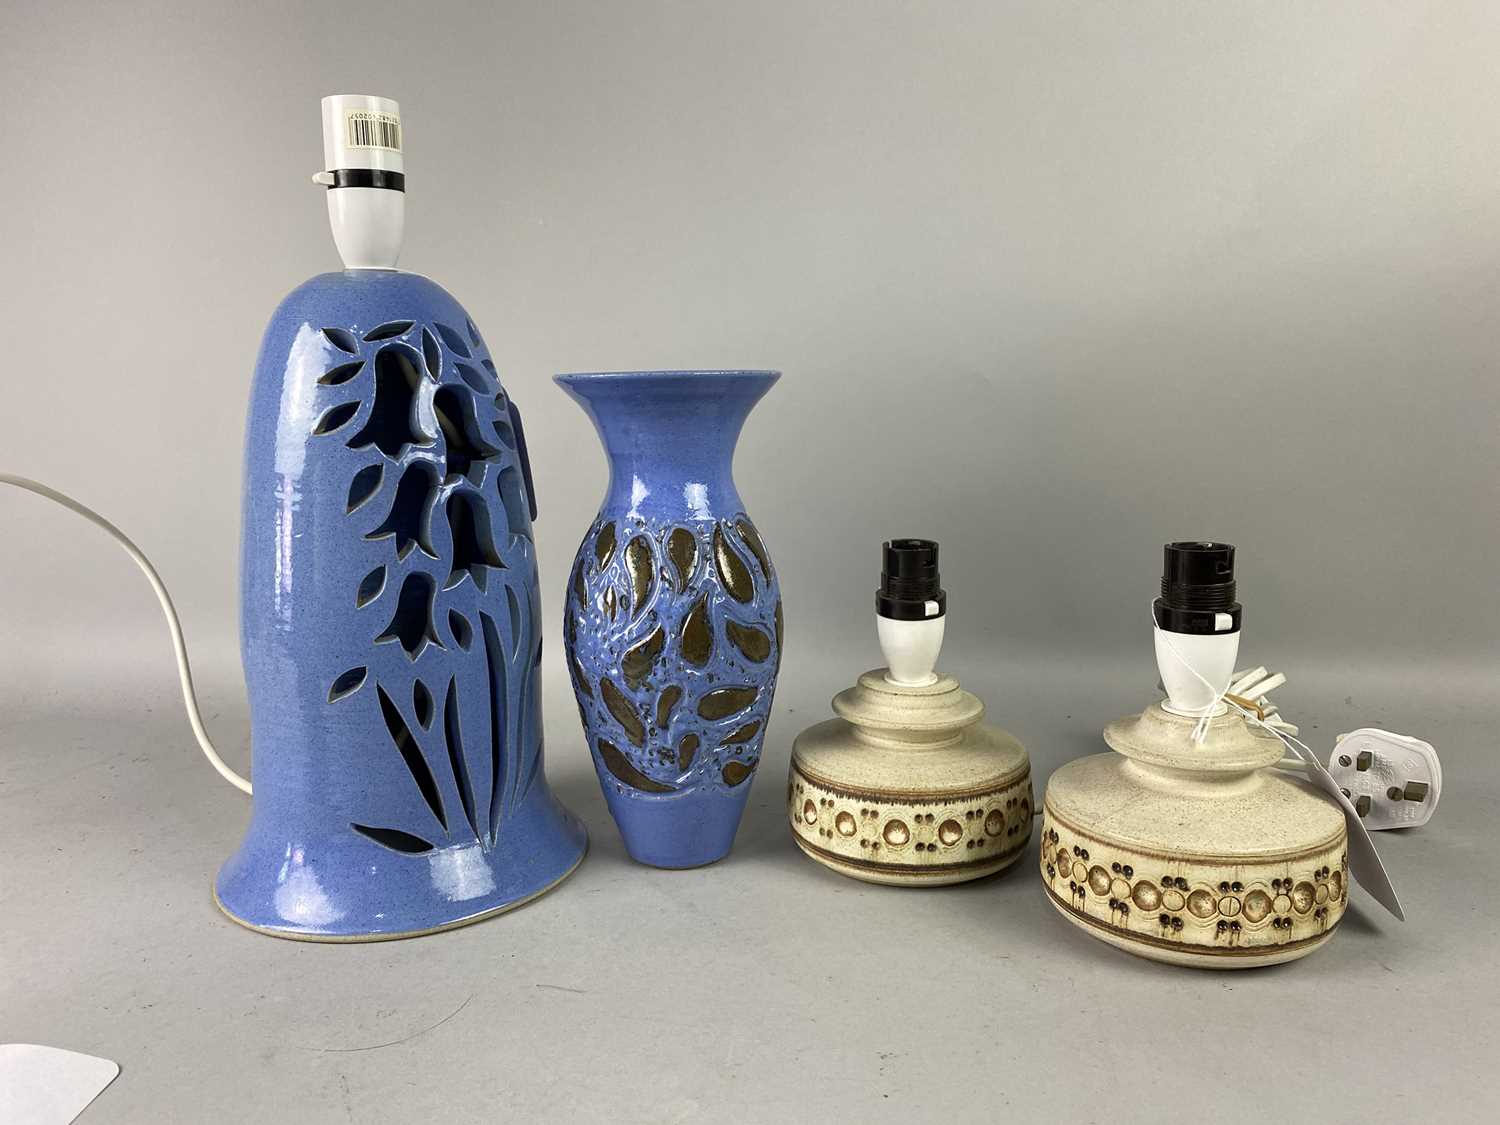 Lot 296 - A RICHARD PRICE POTTERY LAMP AND MATCHED VASE, ALONG WITH A PAIR OF POTTERY LAMPS